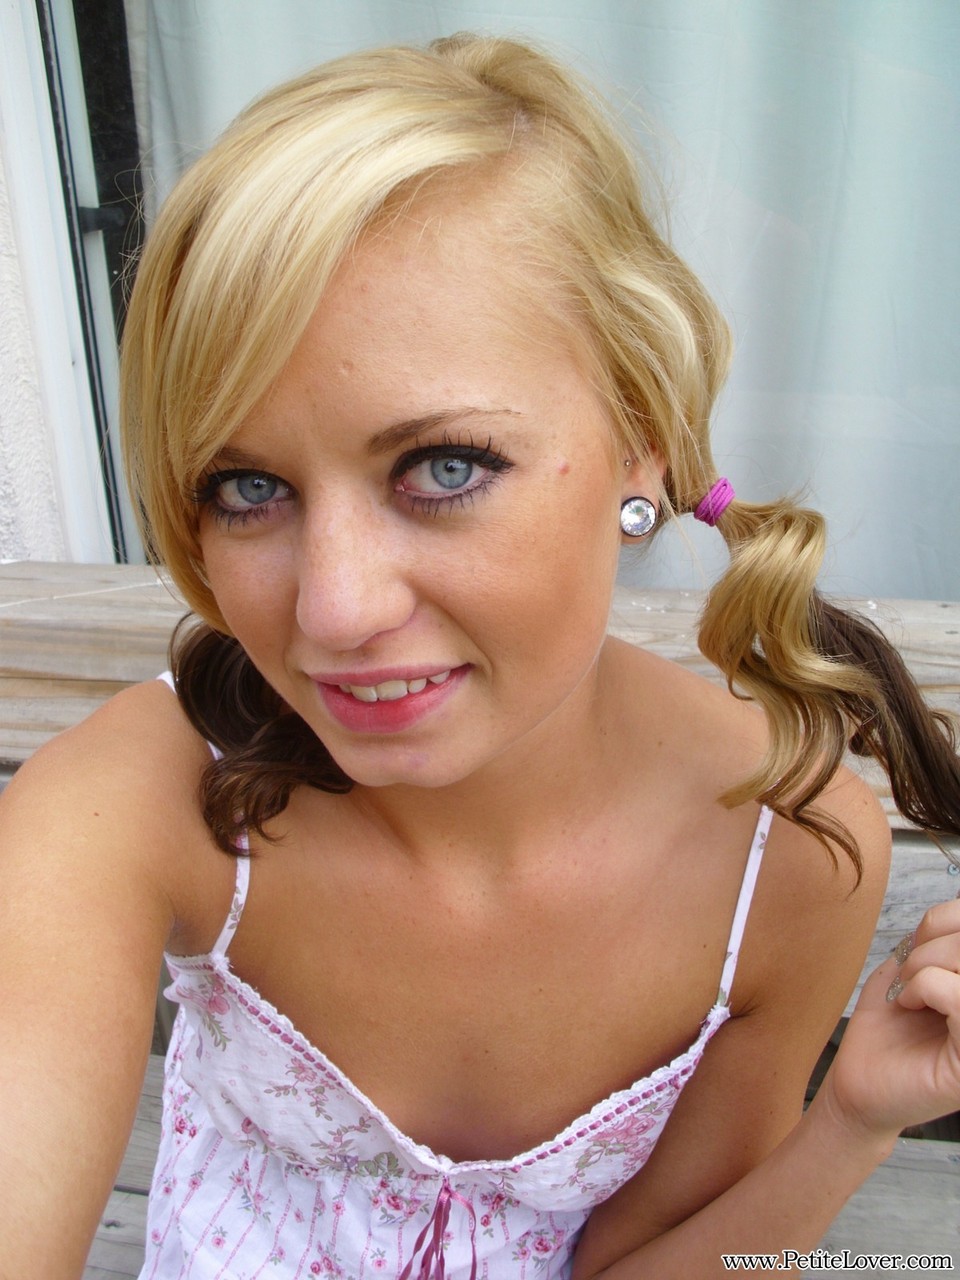 Cute blonde Tiff in pigtails showing off her wee small tits & tiny bald pussy porno foto #428478629 | Petite Lover Pics, Tiff, Amateur, mobiele porno